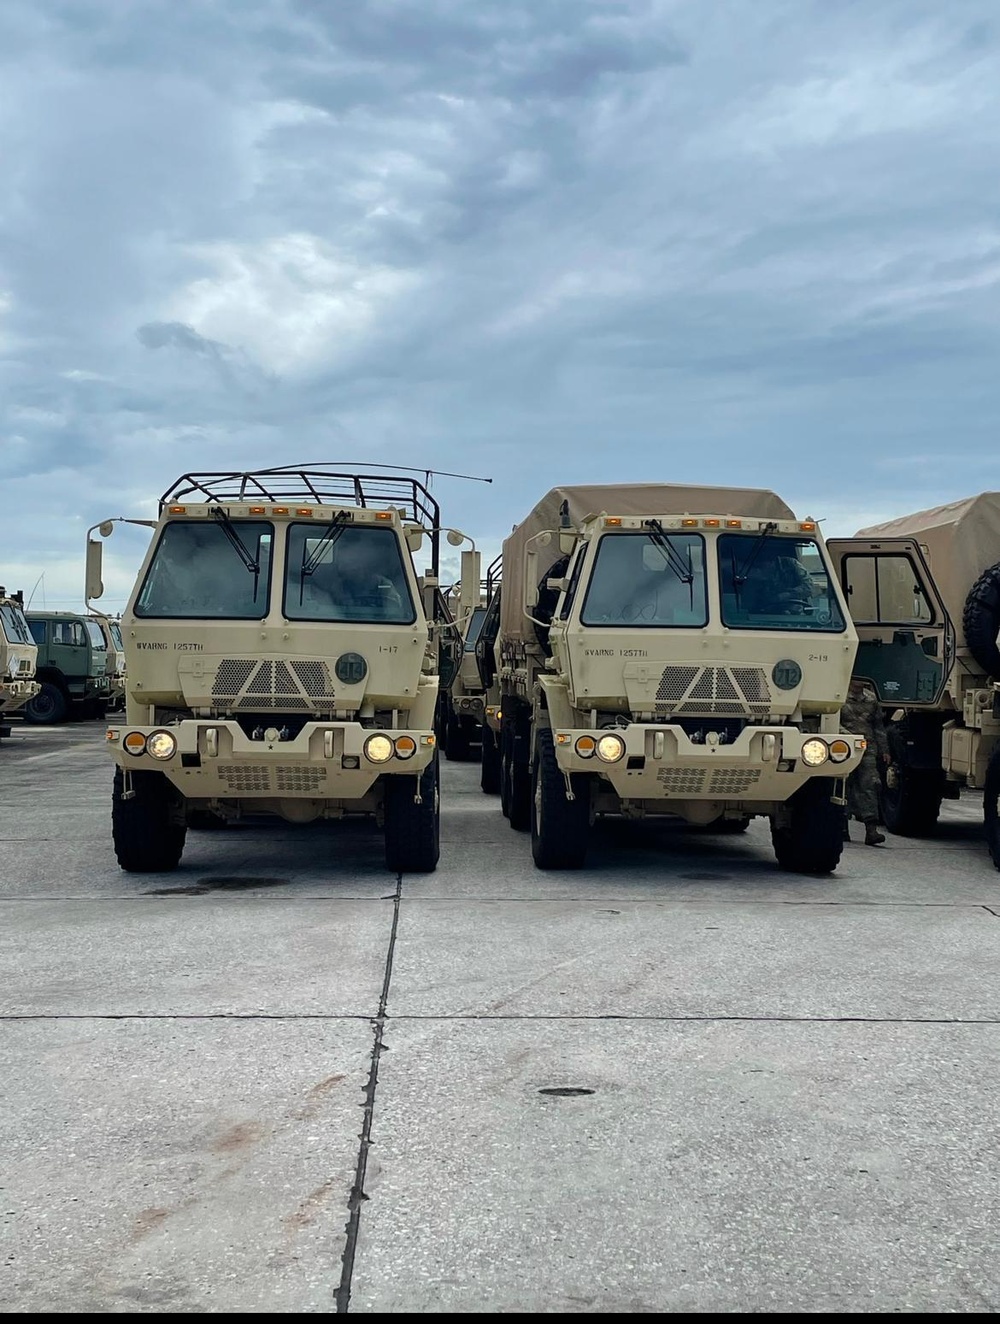 Newest Florida Guard Unit is Ready to Roll